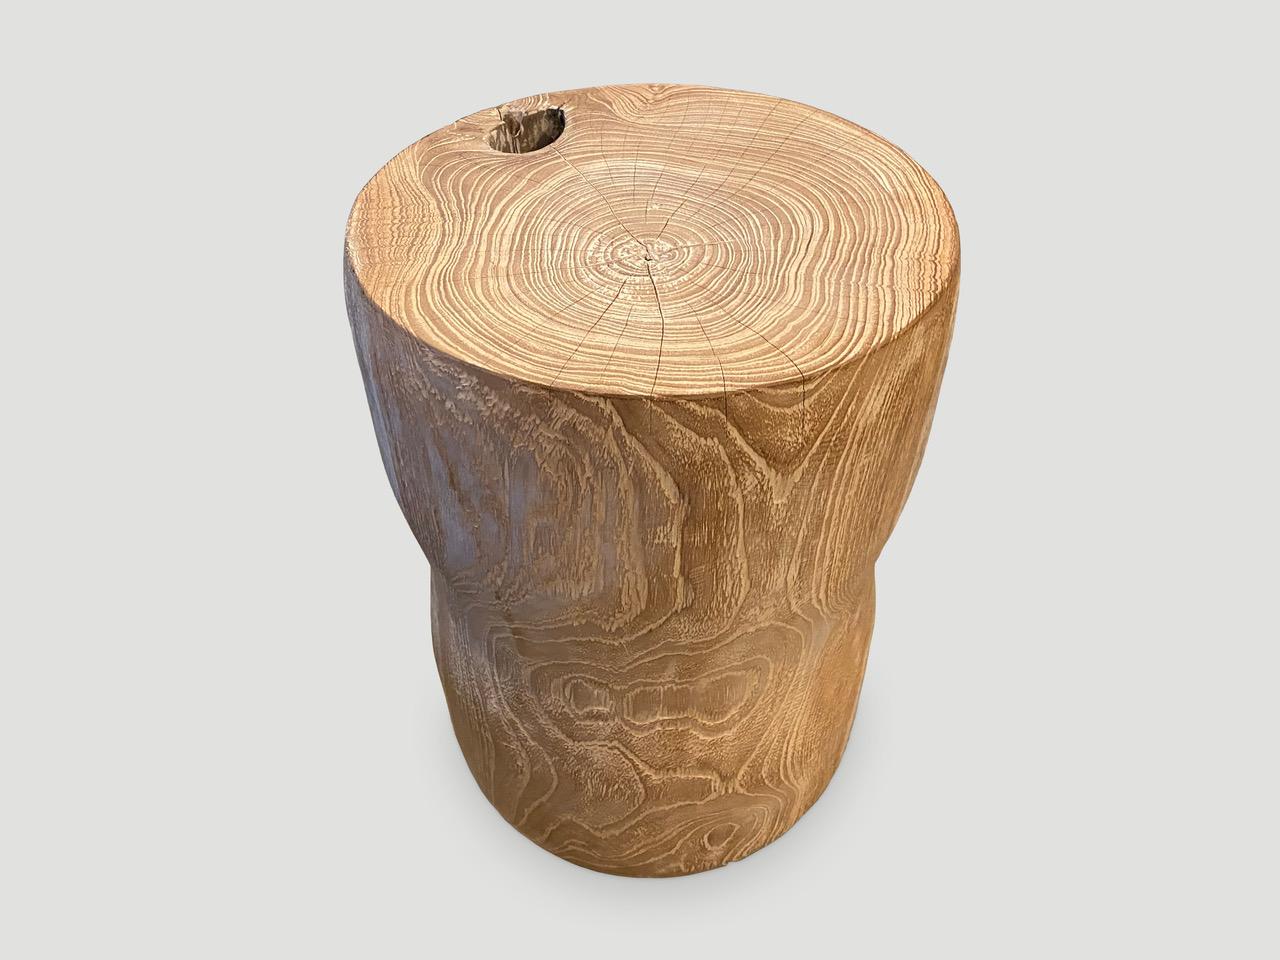 Hand carved cerused teak side table or stool with a subtle smooth hourglass shape that celebrates the cracks and crevices found in reclaimed teak. This style works well in a variety of interior settings such as seating or side tables, as shown in